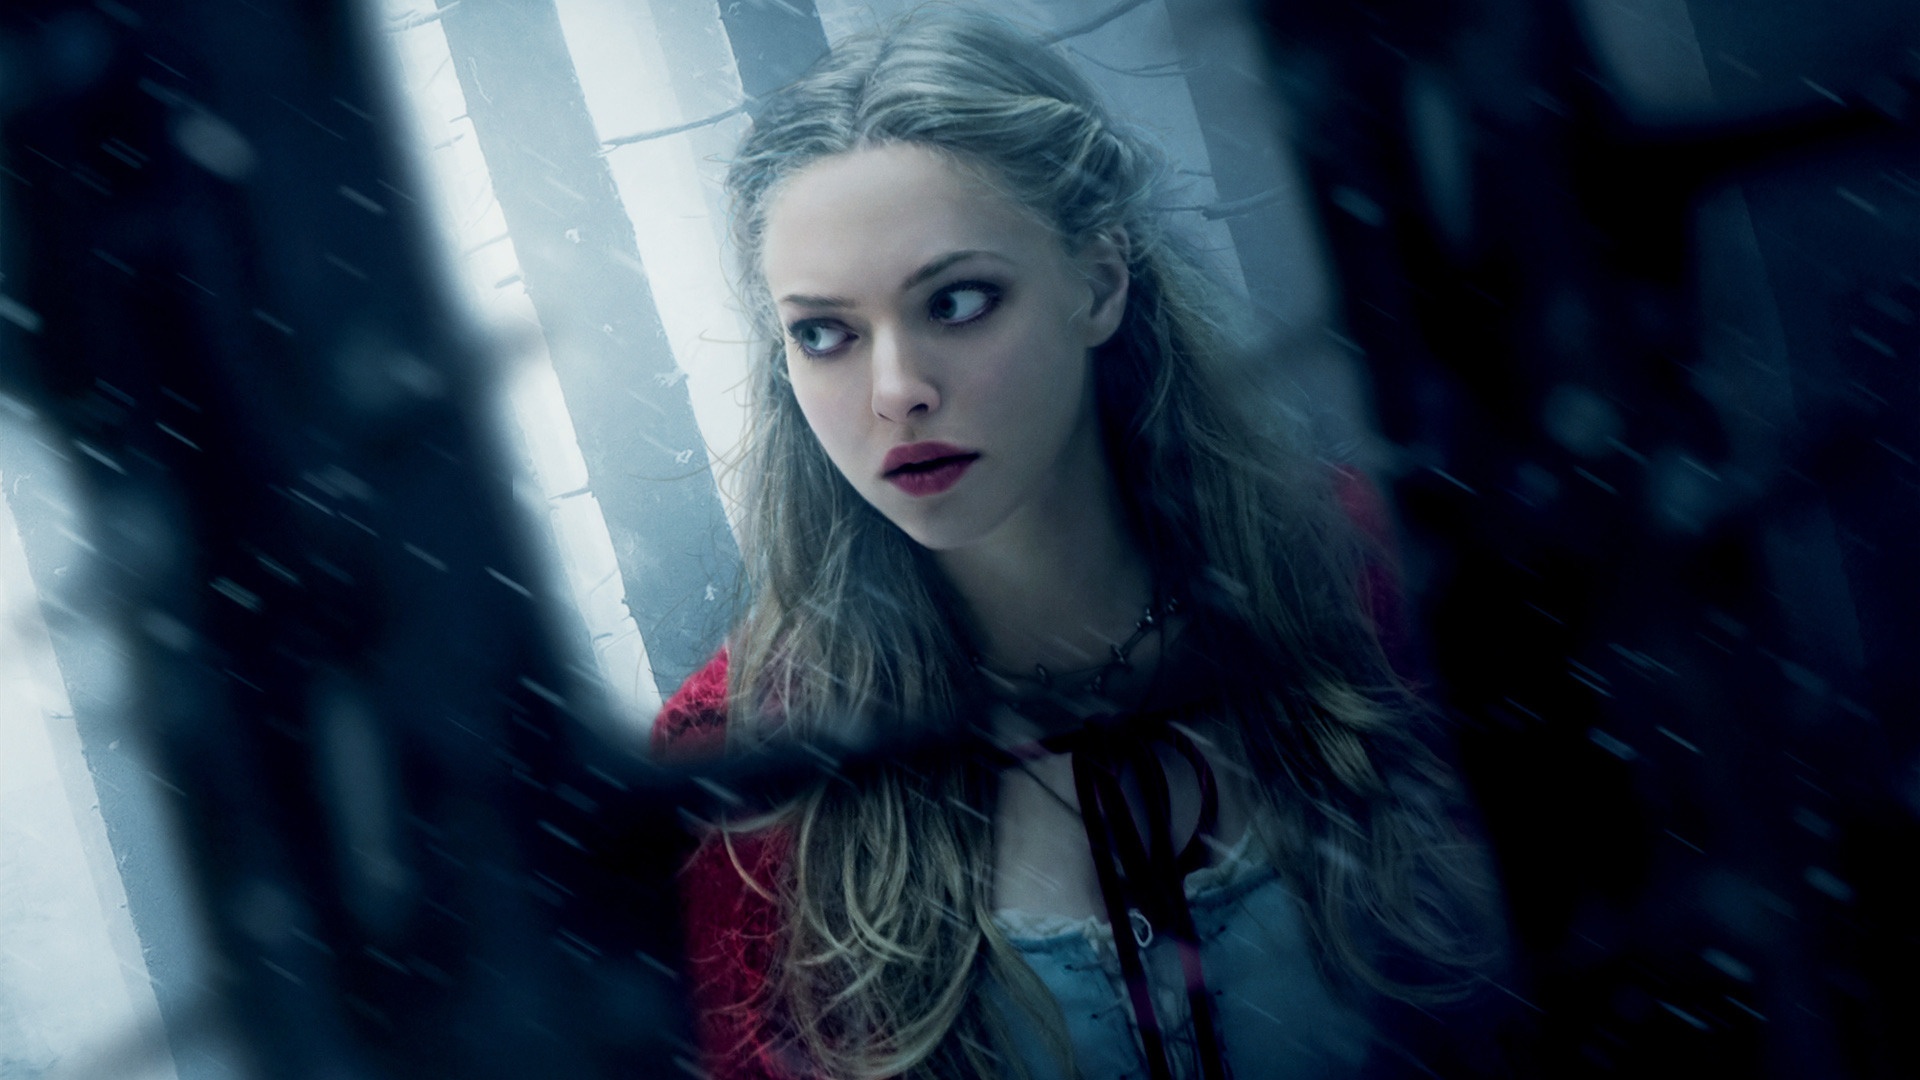 amanda seyfried PICTURES hd A17